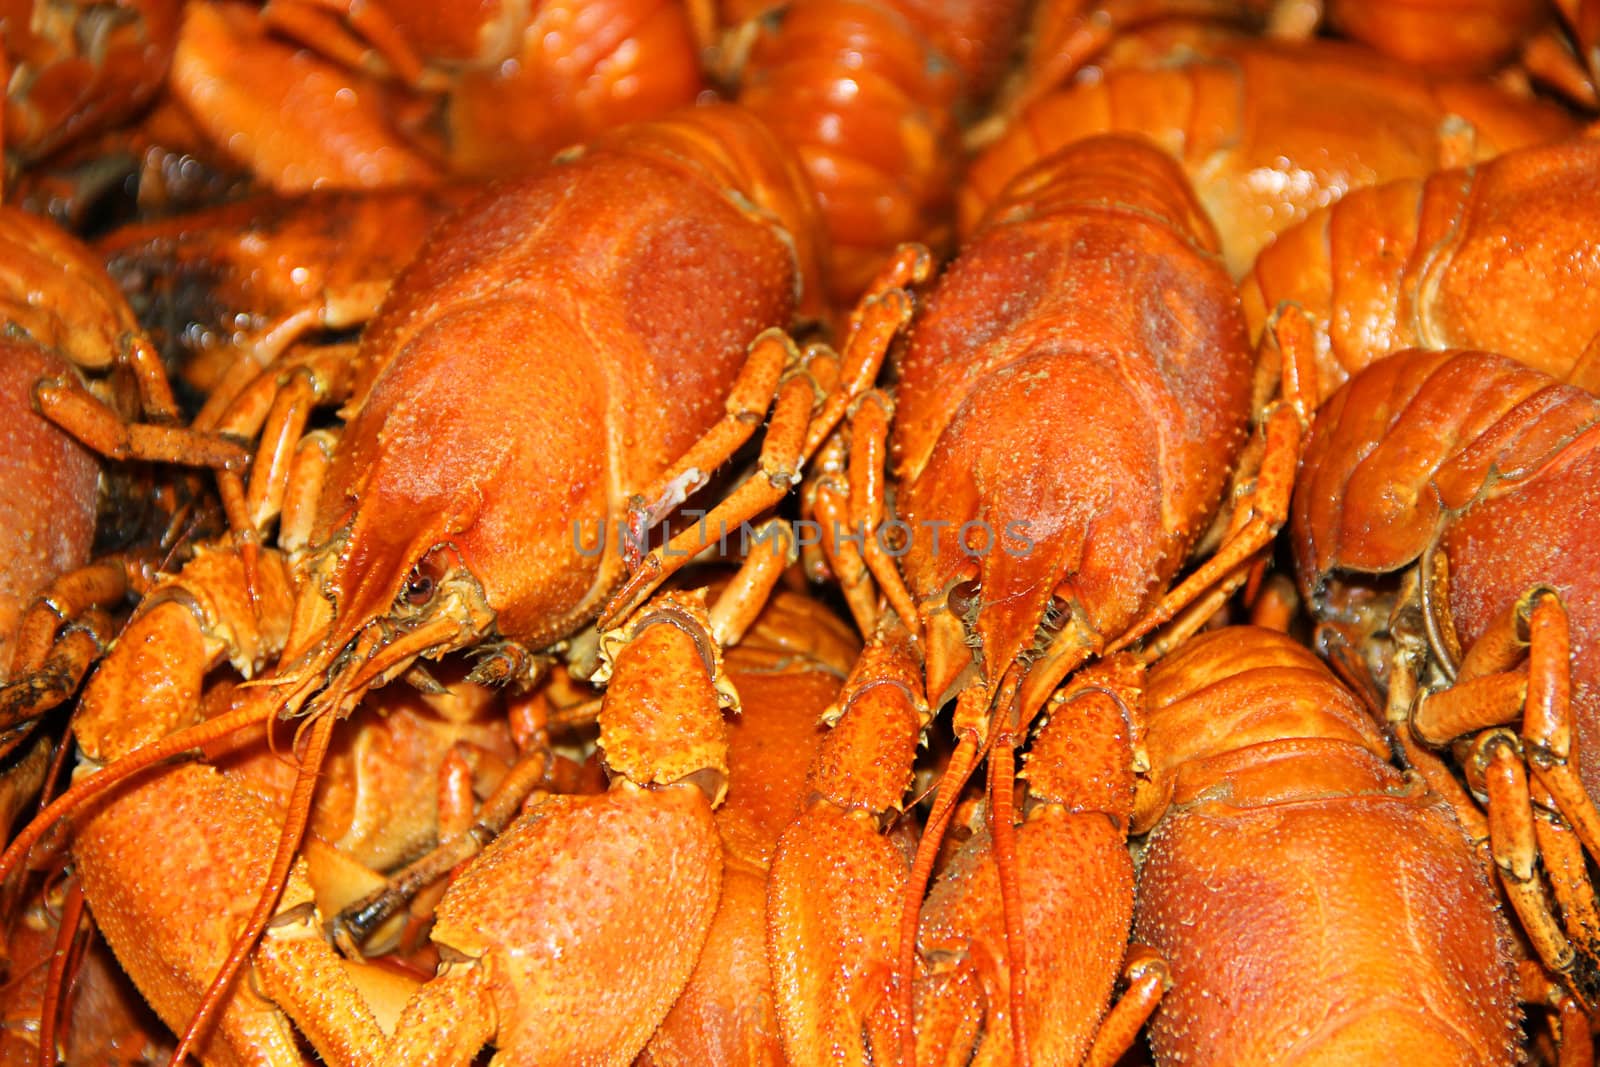 Many crawfishes by Julialine